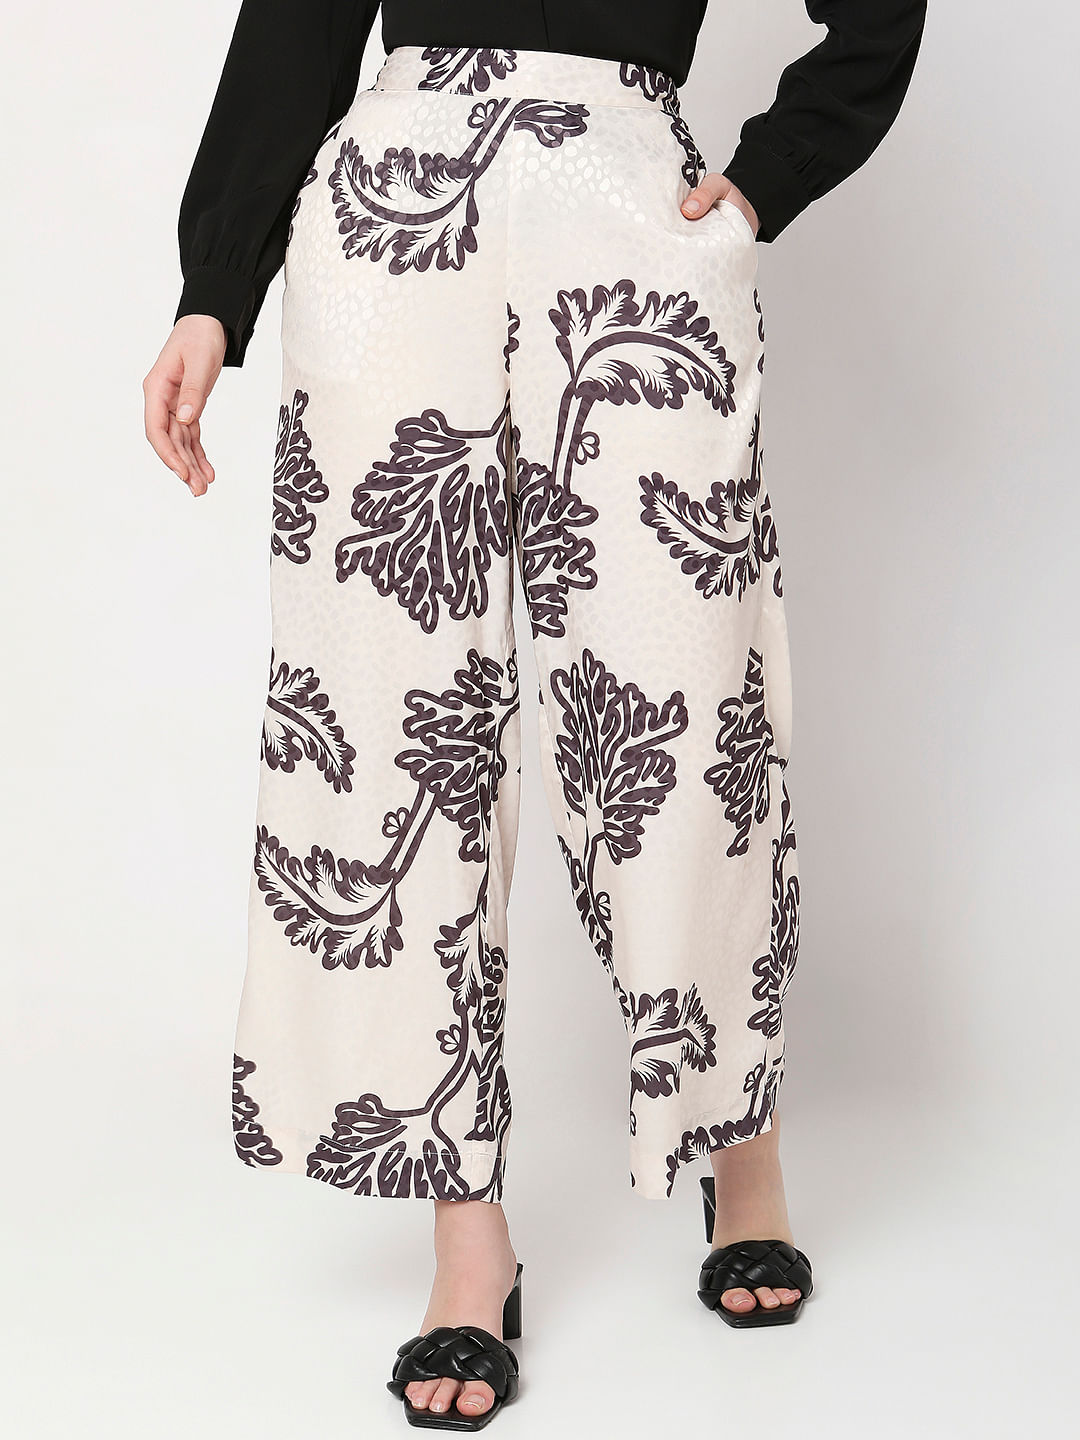 How to Wear Printed Pants Like a 40 Blogger  Printed pants outfits  Fashion Patterned pants outfit